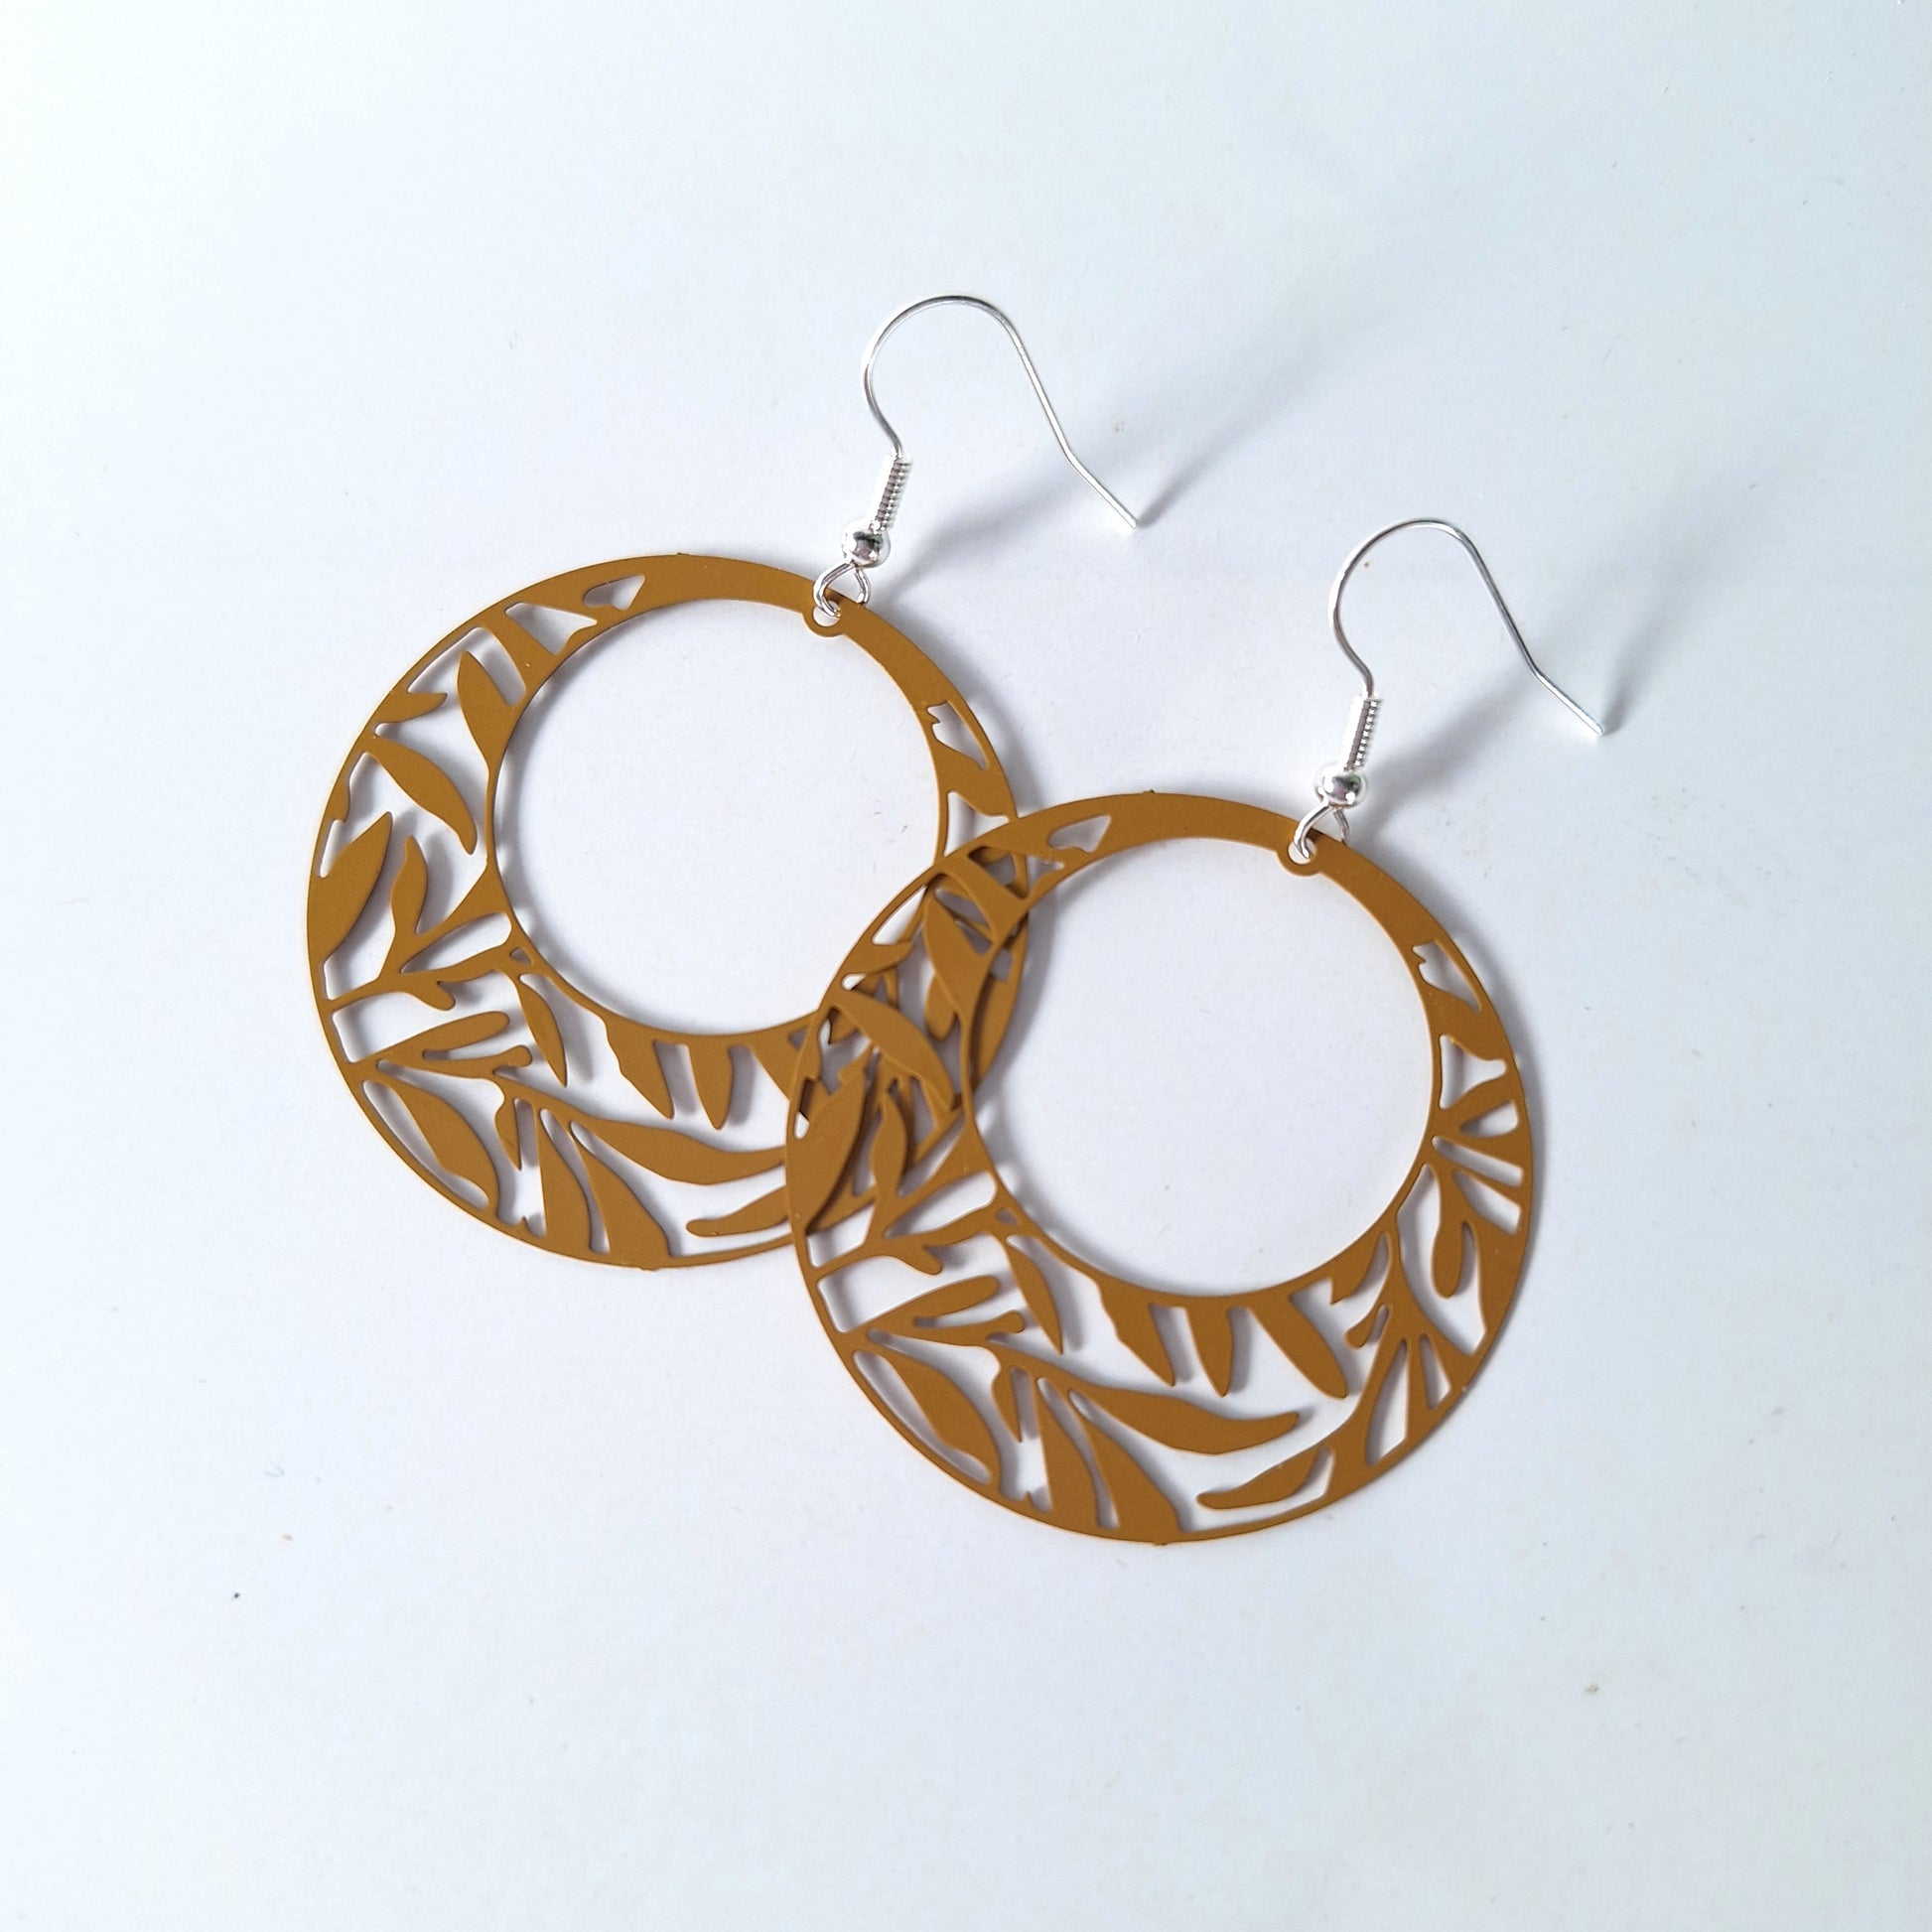 Round foliage earrings featuring leaves in mustard by Fall for Fancy